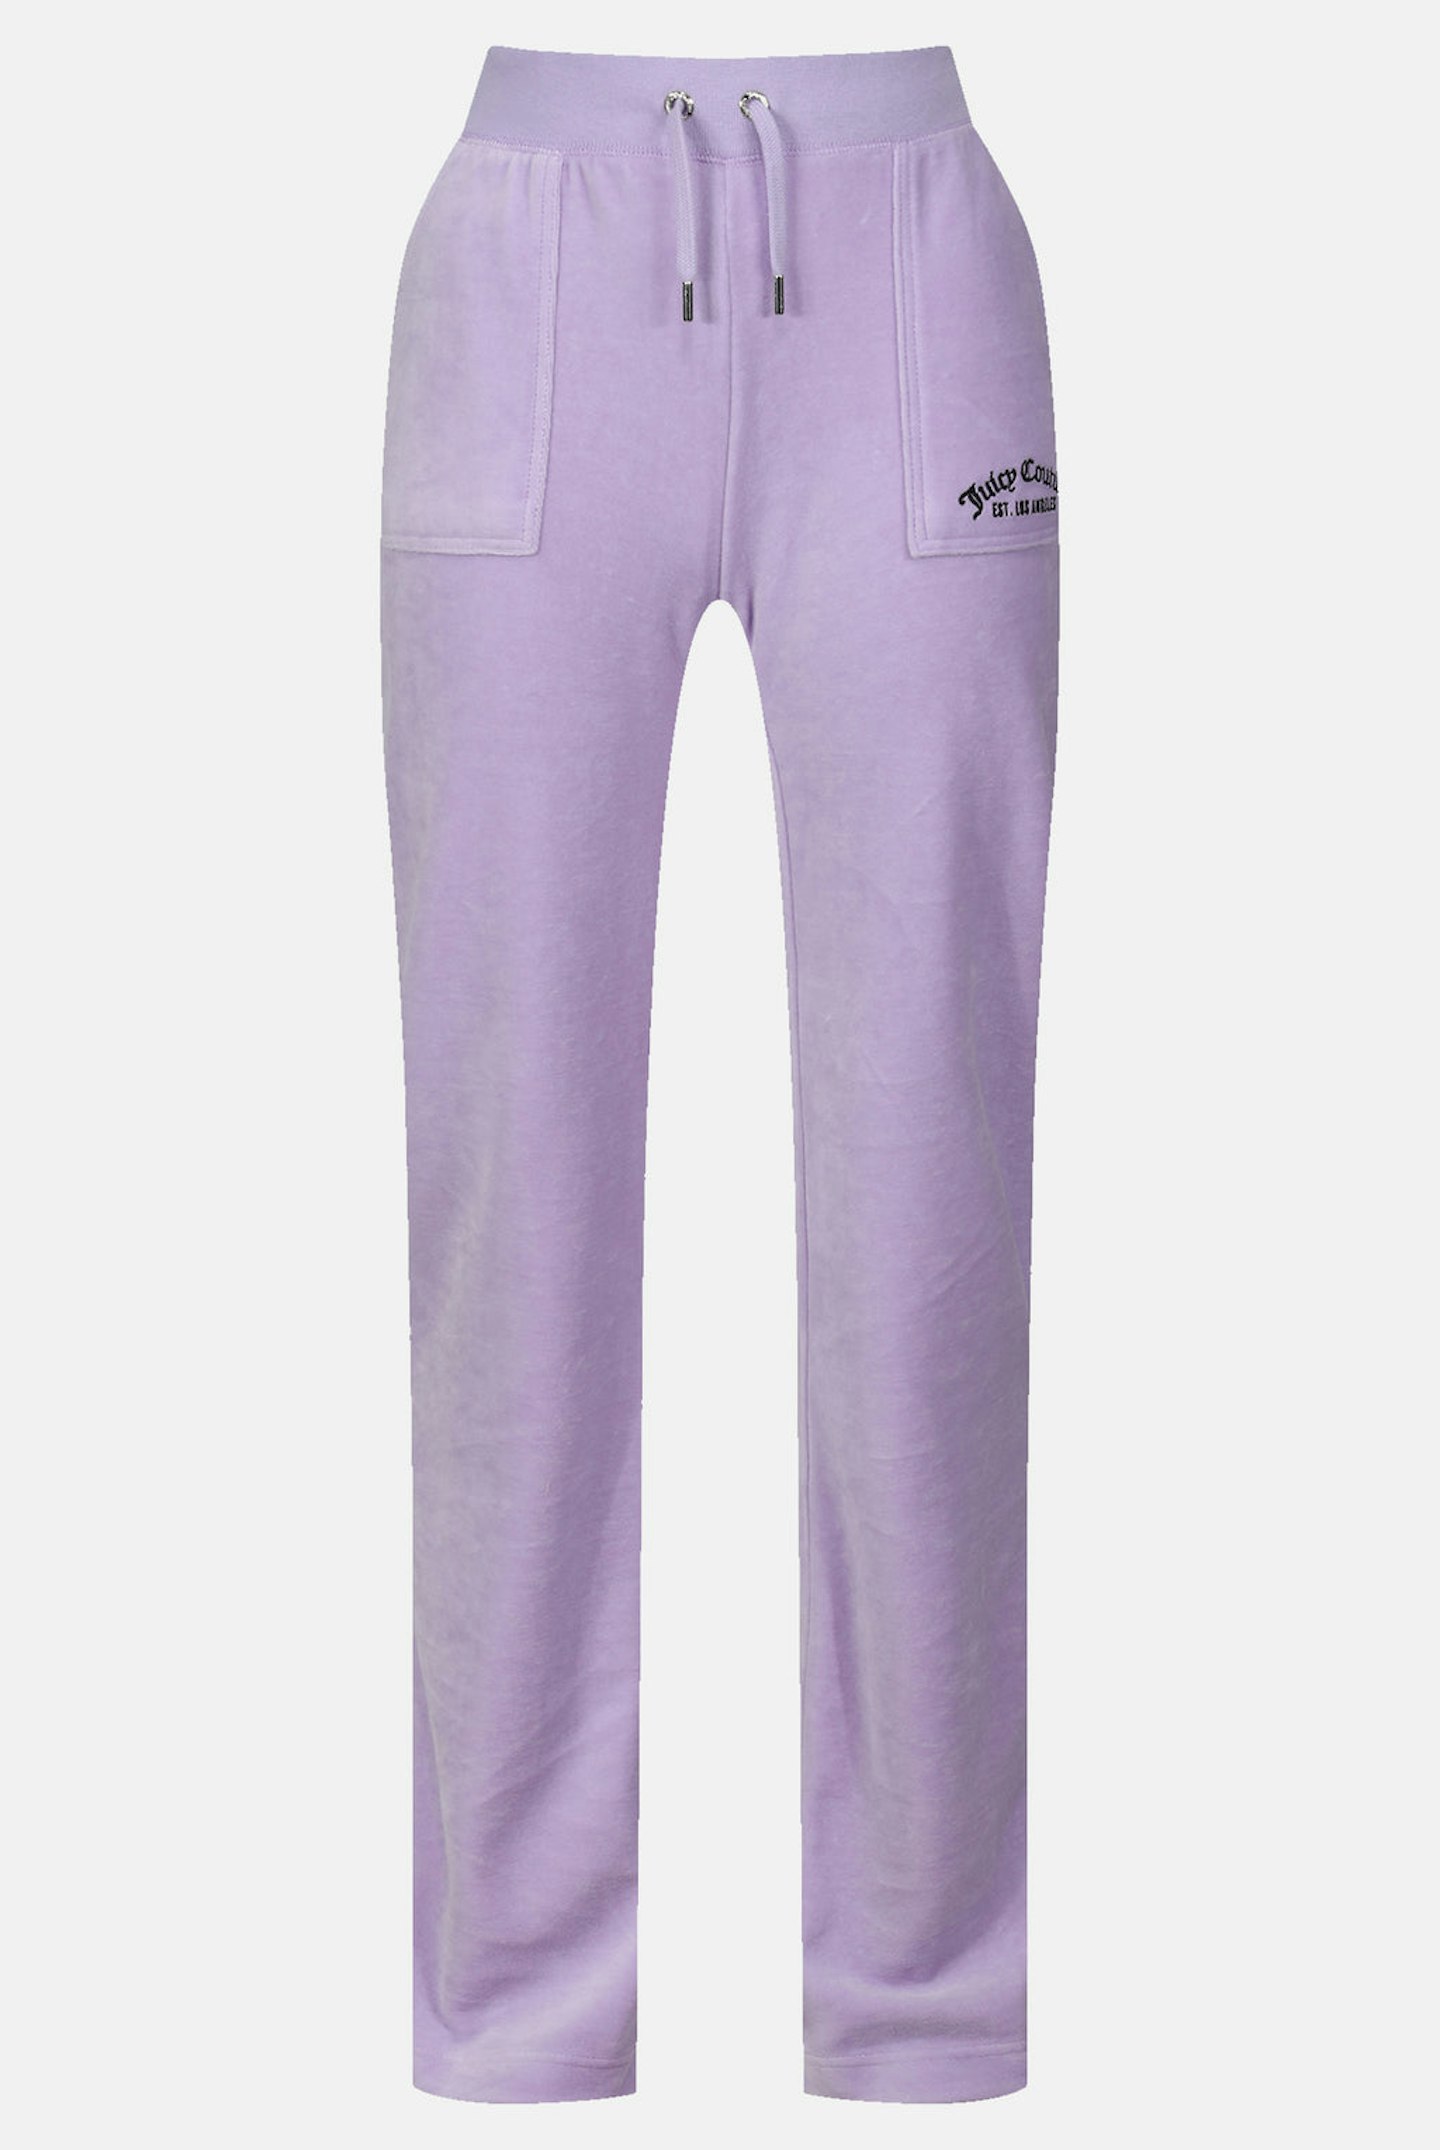 Juicy Couture, Pastel Lilac Recycled Velour Pocketed Bottoms